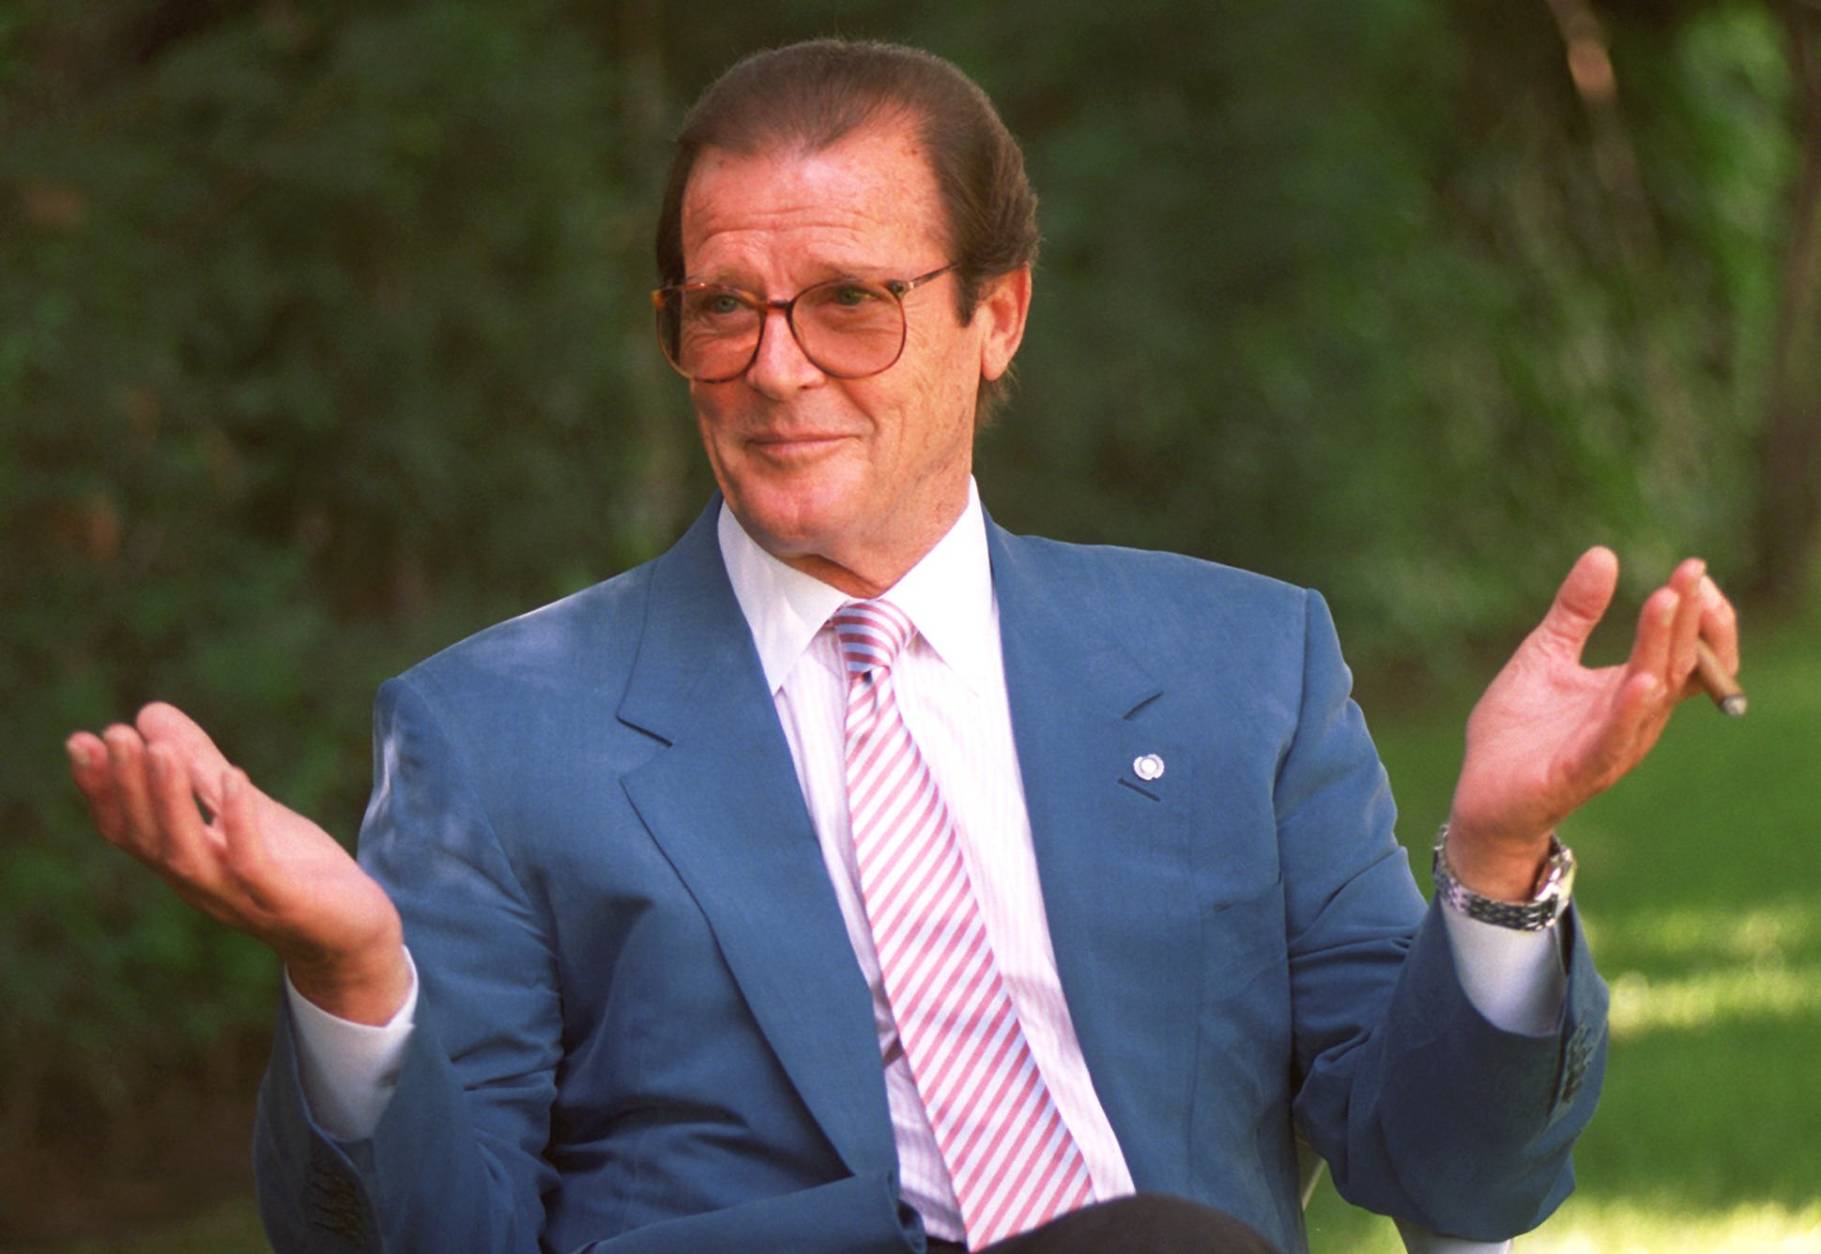 British actor Roger Moore gestures during an interview in the Studio City section of Los Angeles, April 22, 1996. (AP Photo/Chris Pizzello)